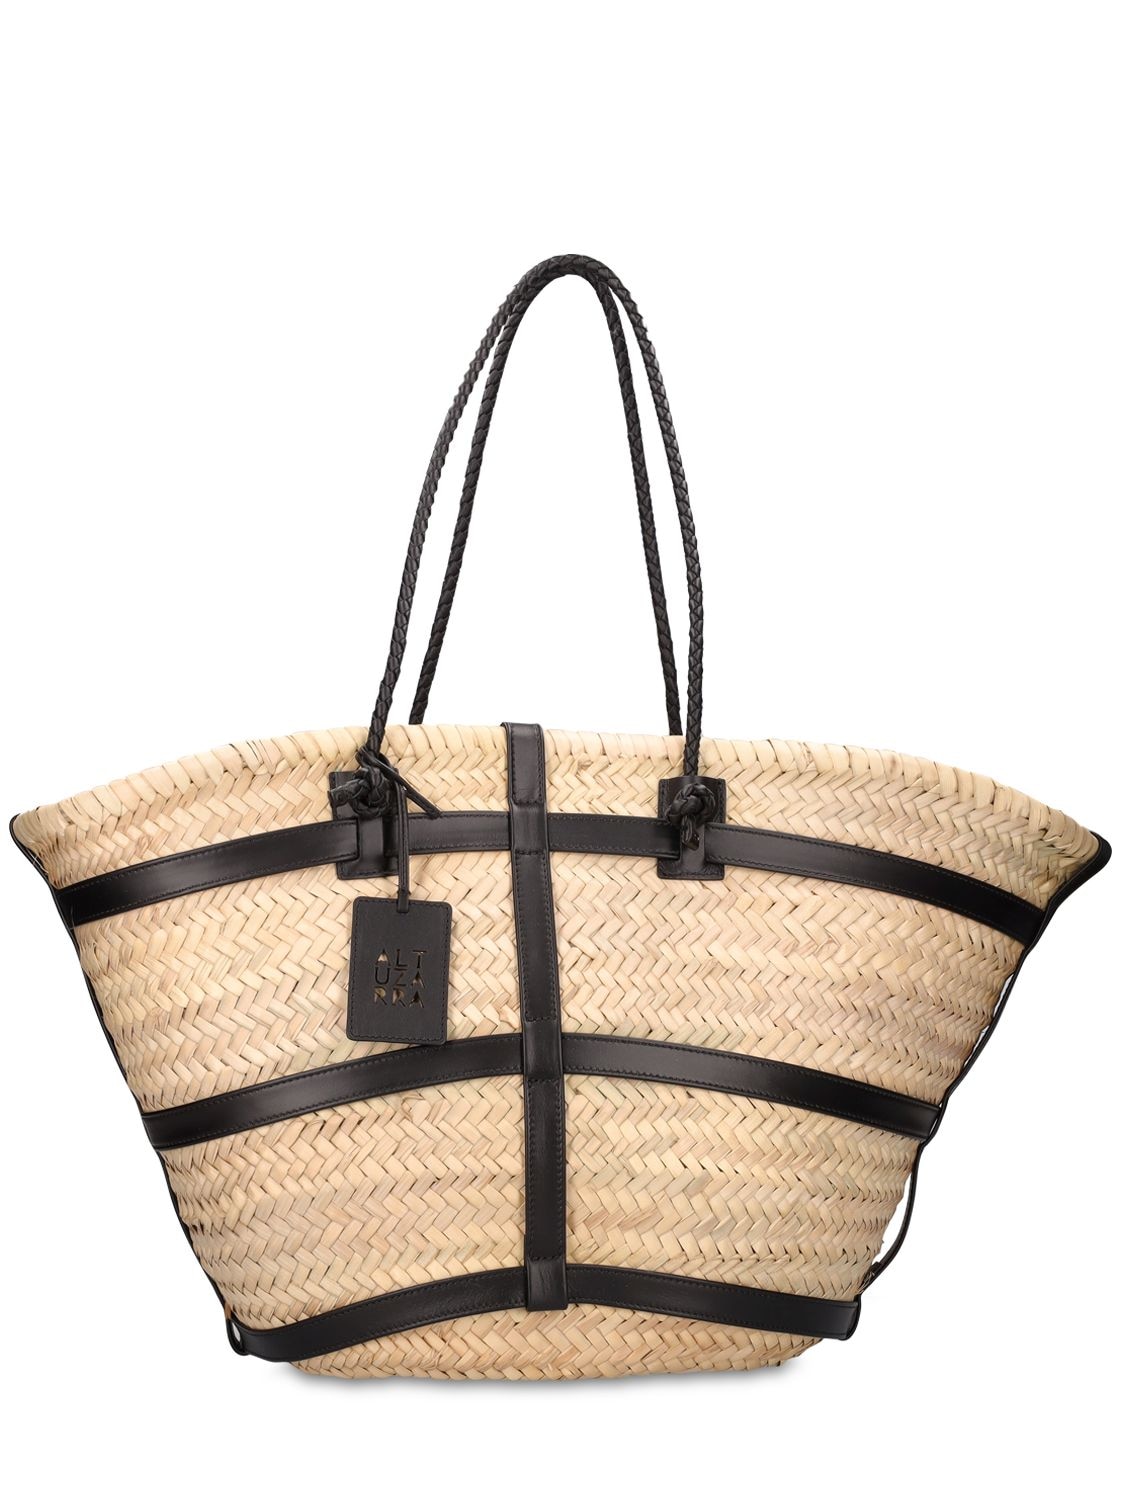 Altuzarra Large Watermill Straw & Faux Leather Bag In Natural,black